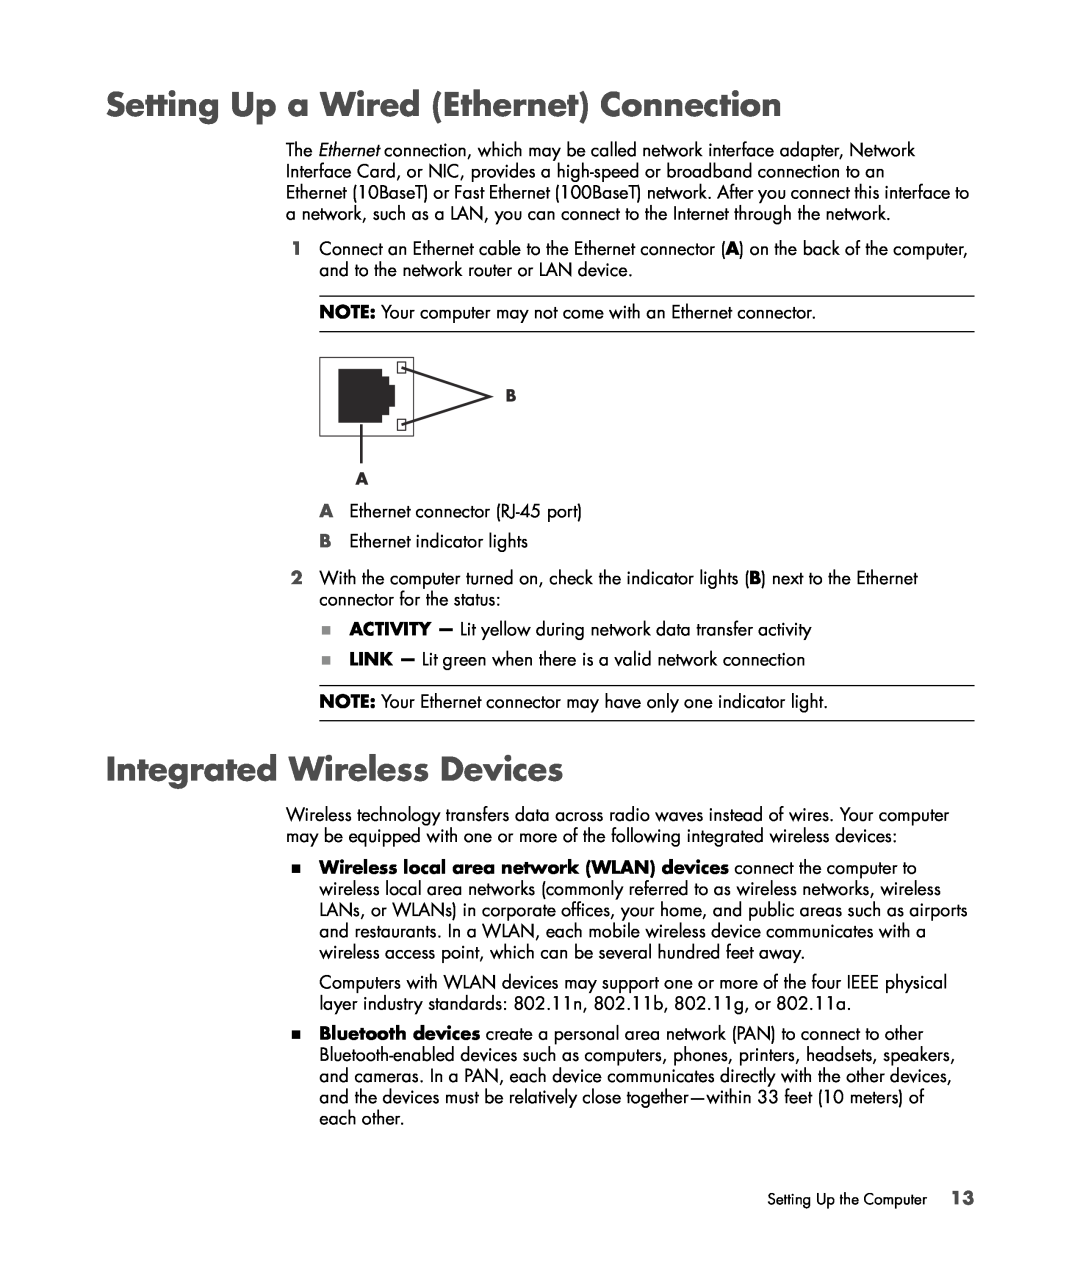 HP SR5470AN, SR5558D, SR5450F, SR5448F, SR5421F, SR5559D Setting Up a Wired Ethernet Connection, Integrated Wireless Devices 